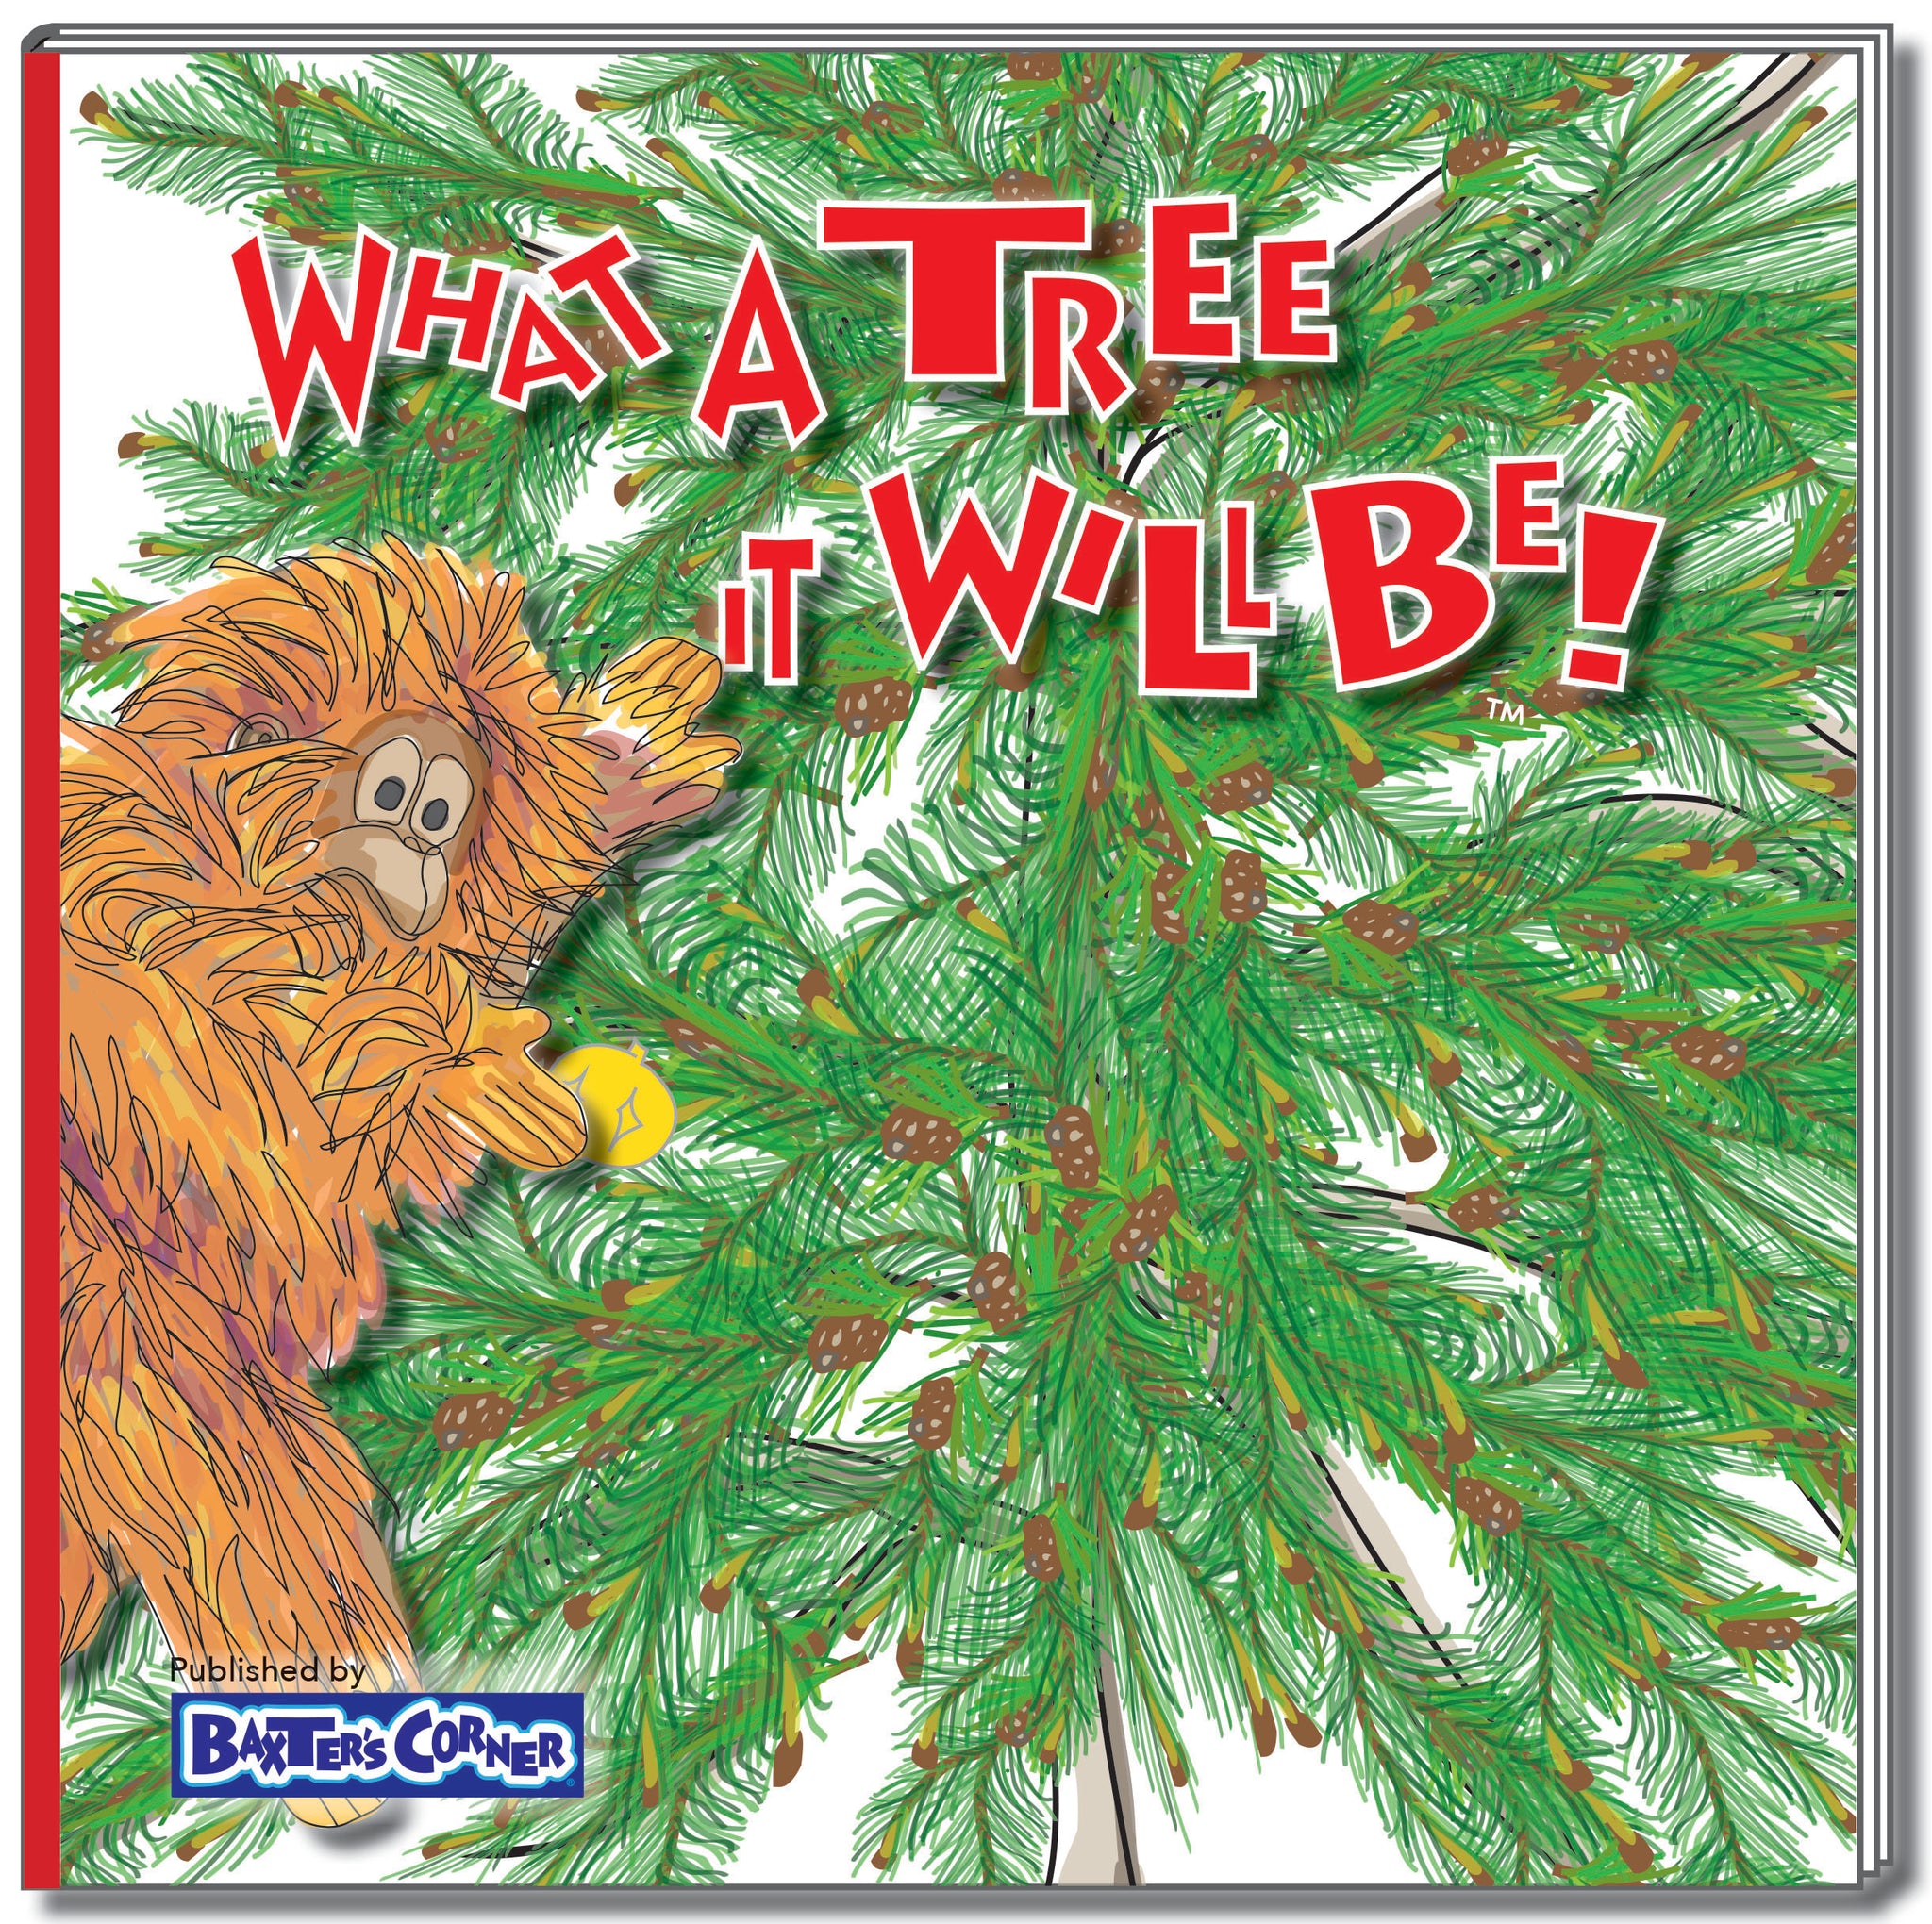 "What a Tree It Will Be! - Story about Cooperation during the Holidays